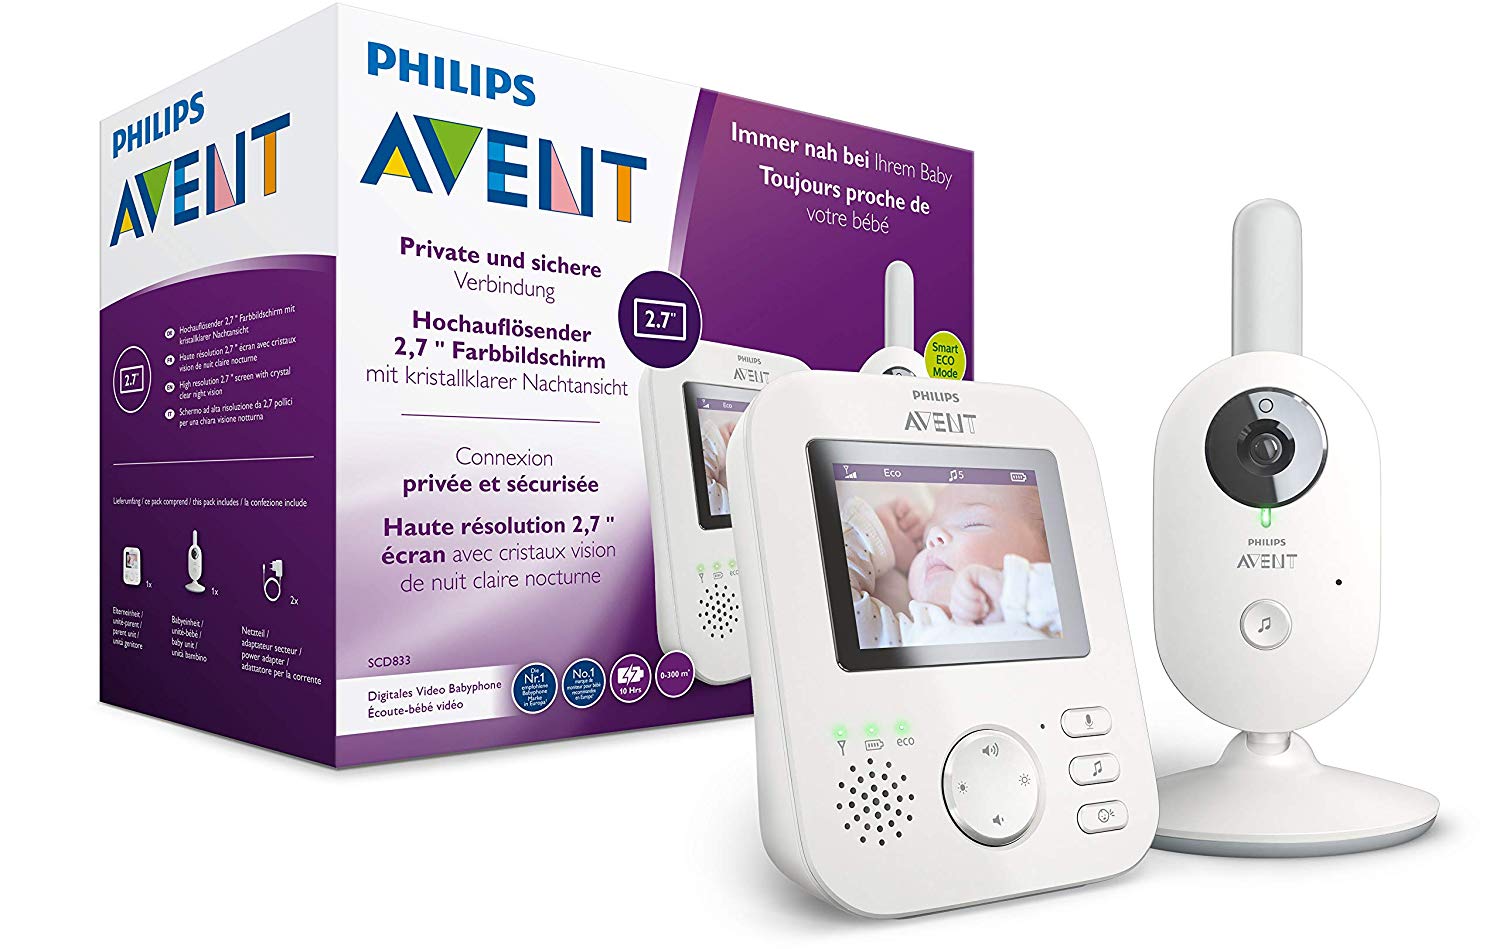 Philips AVENT Baby monitor SCD833 solo 139€